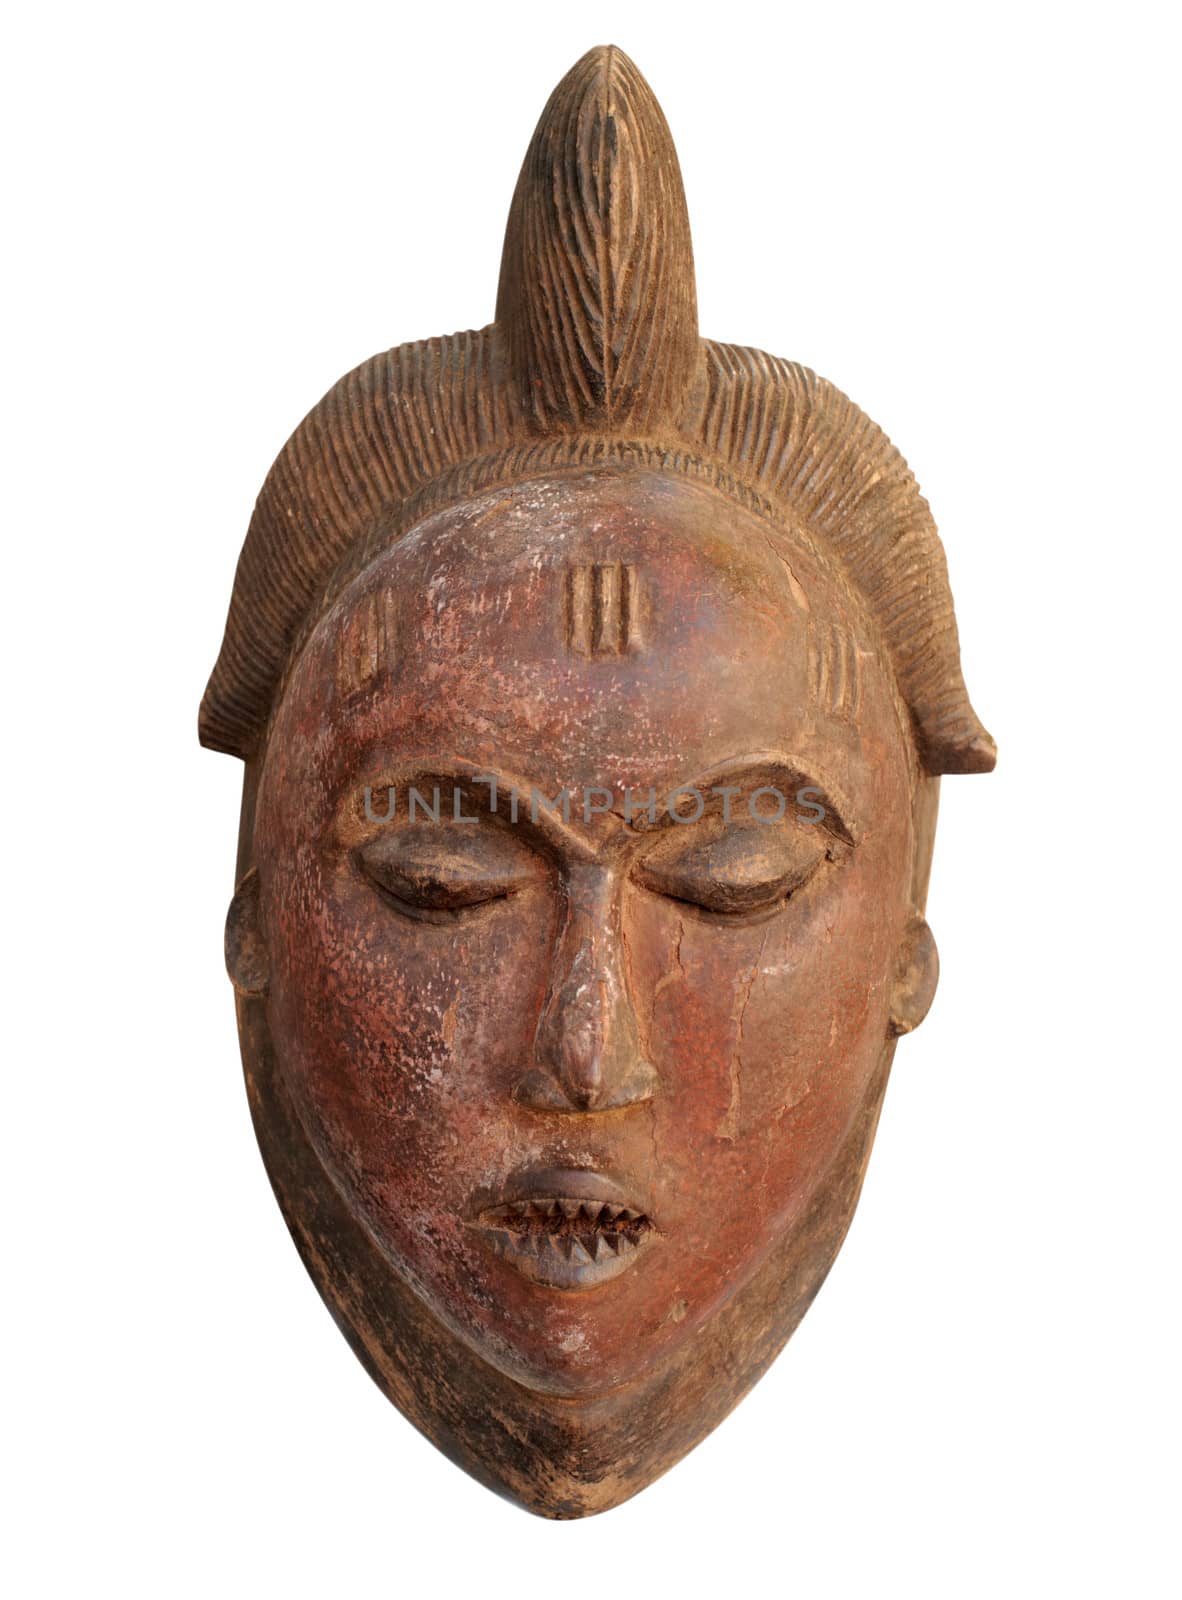 Old wooden mask from South Africa